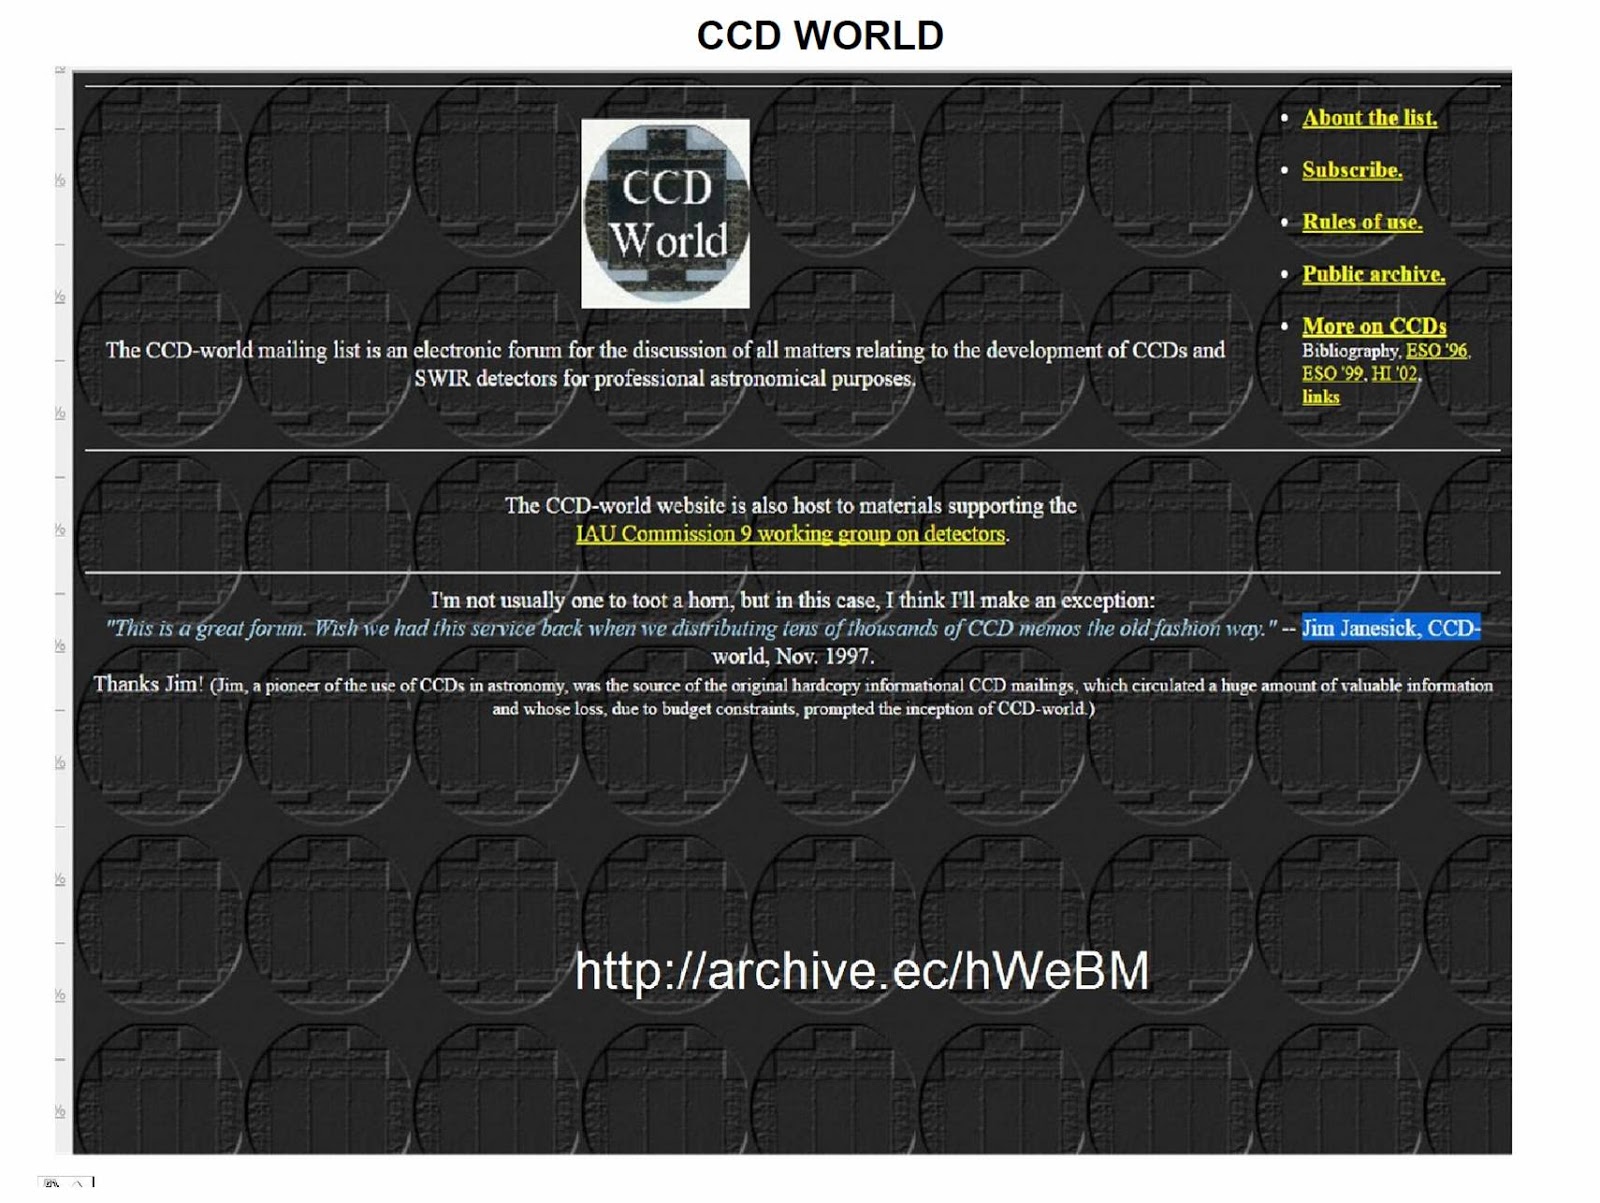 Janesick:  CCD World mailing list for professional astronomers